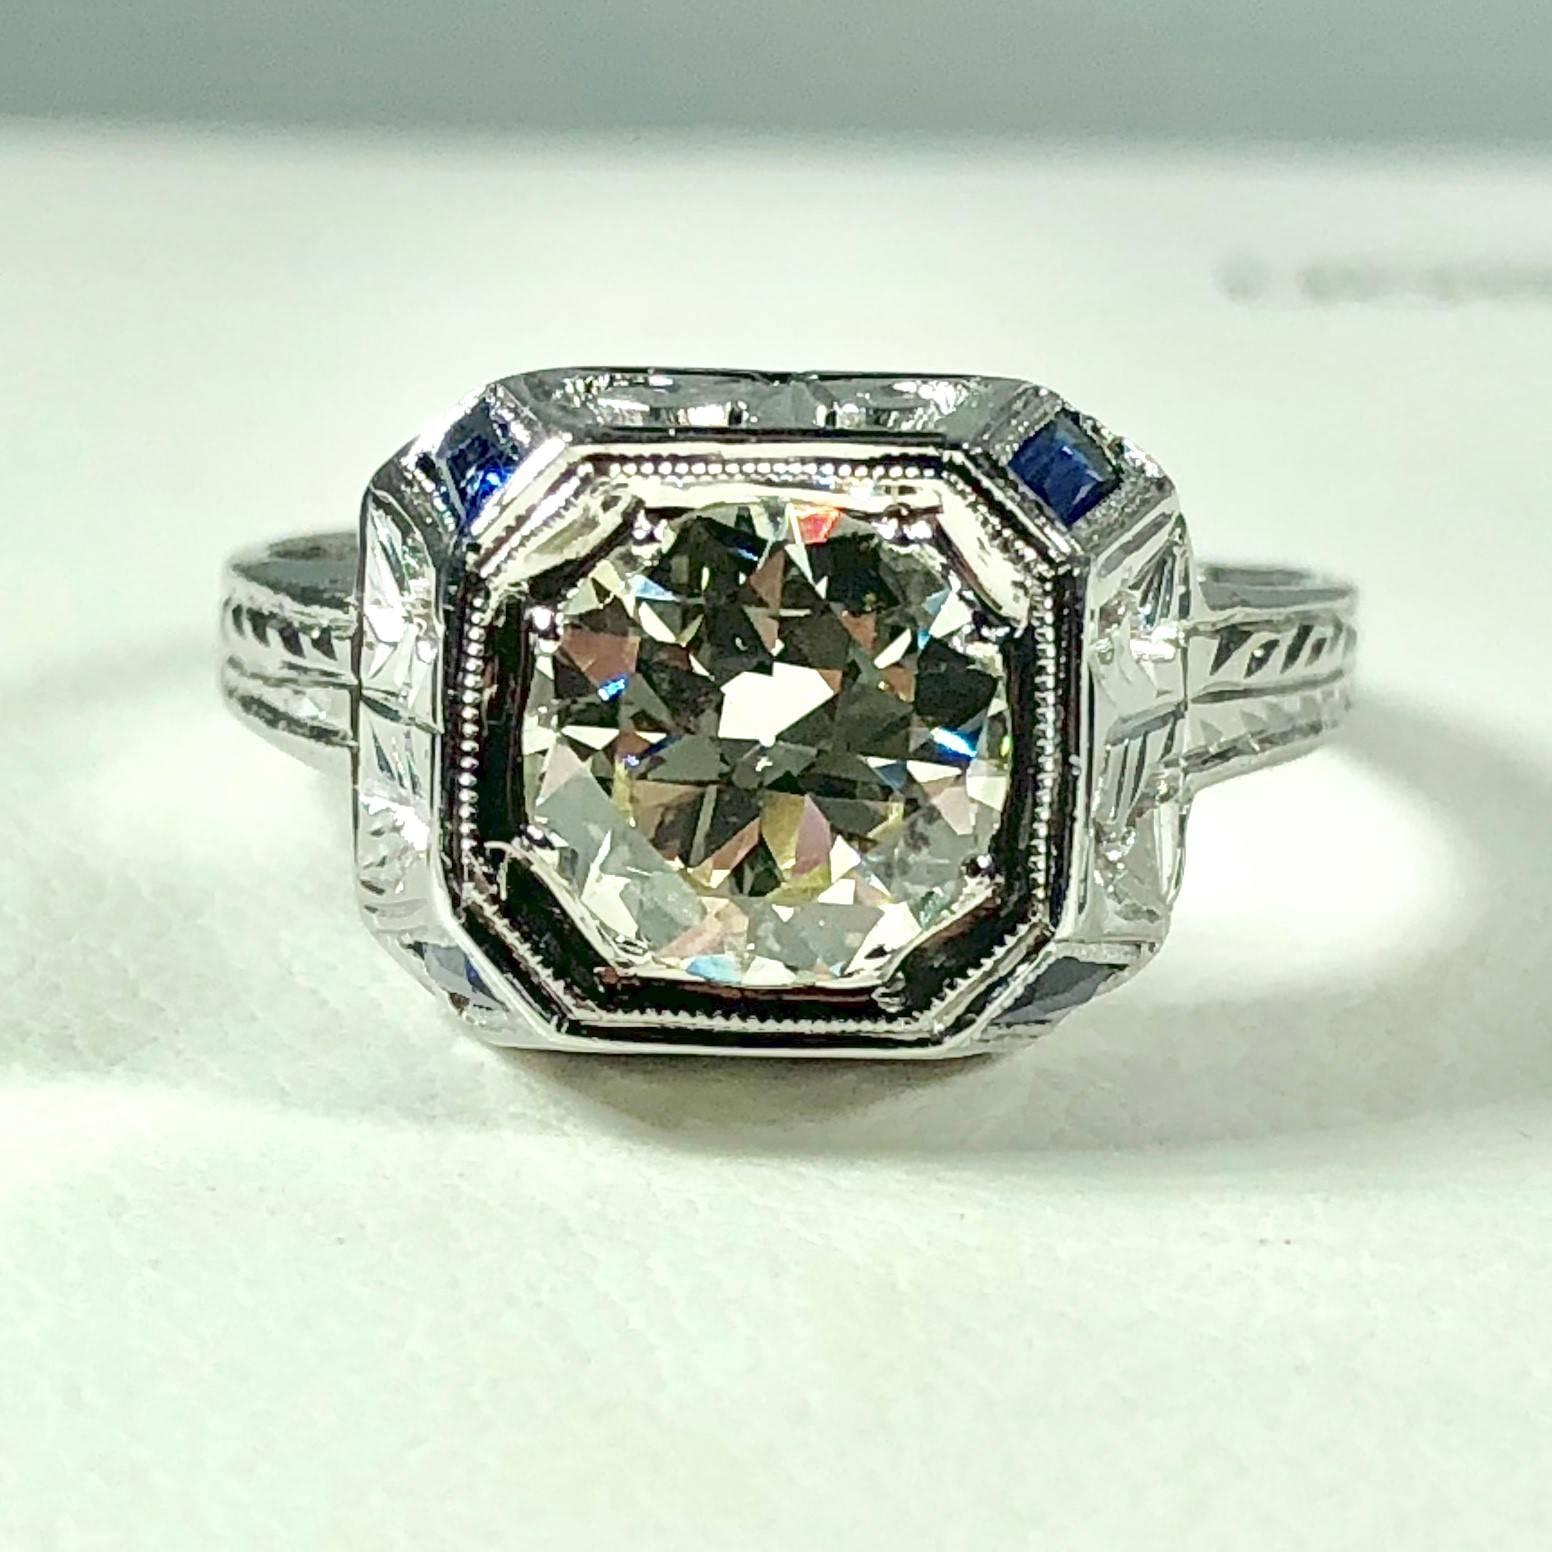 Art Deco 18 karat 1.40 carat European cut diamond and sapphire engagement ring. This true Art Deco piece is a work of art. Created in 18 karat white gold weighing, 3.8grams, 2.4 dwt. Filigree cut out design build up the dome centerpiece. The light